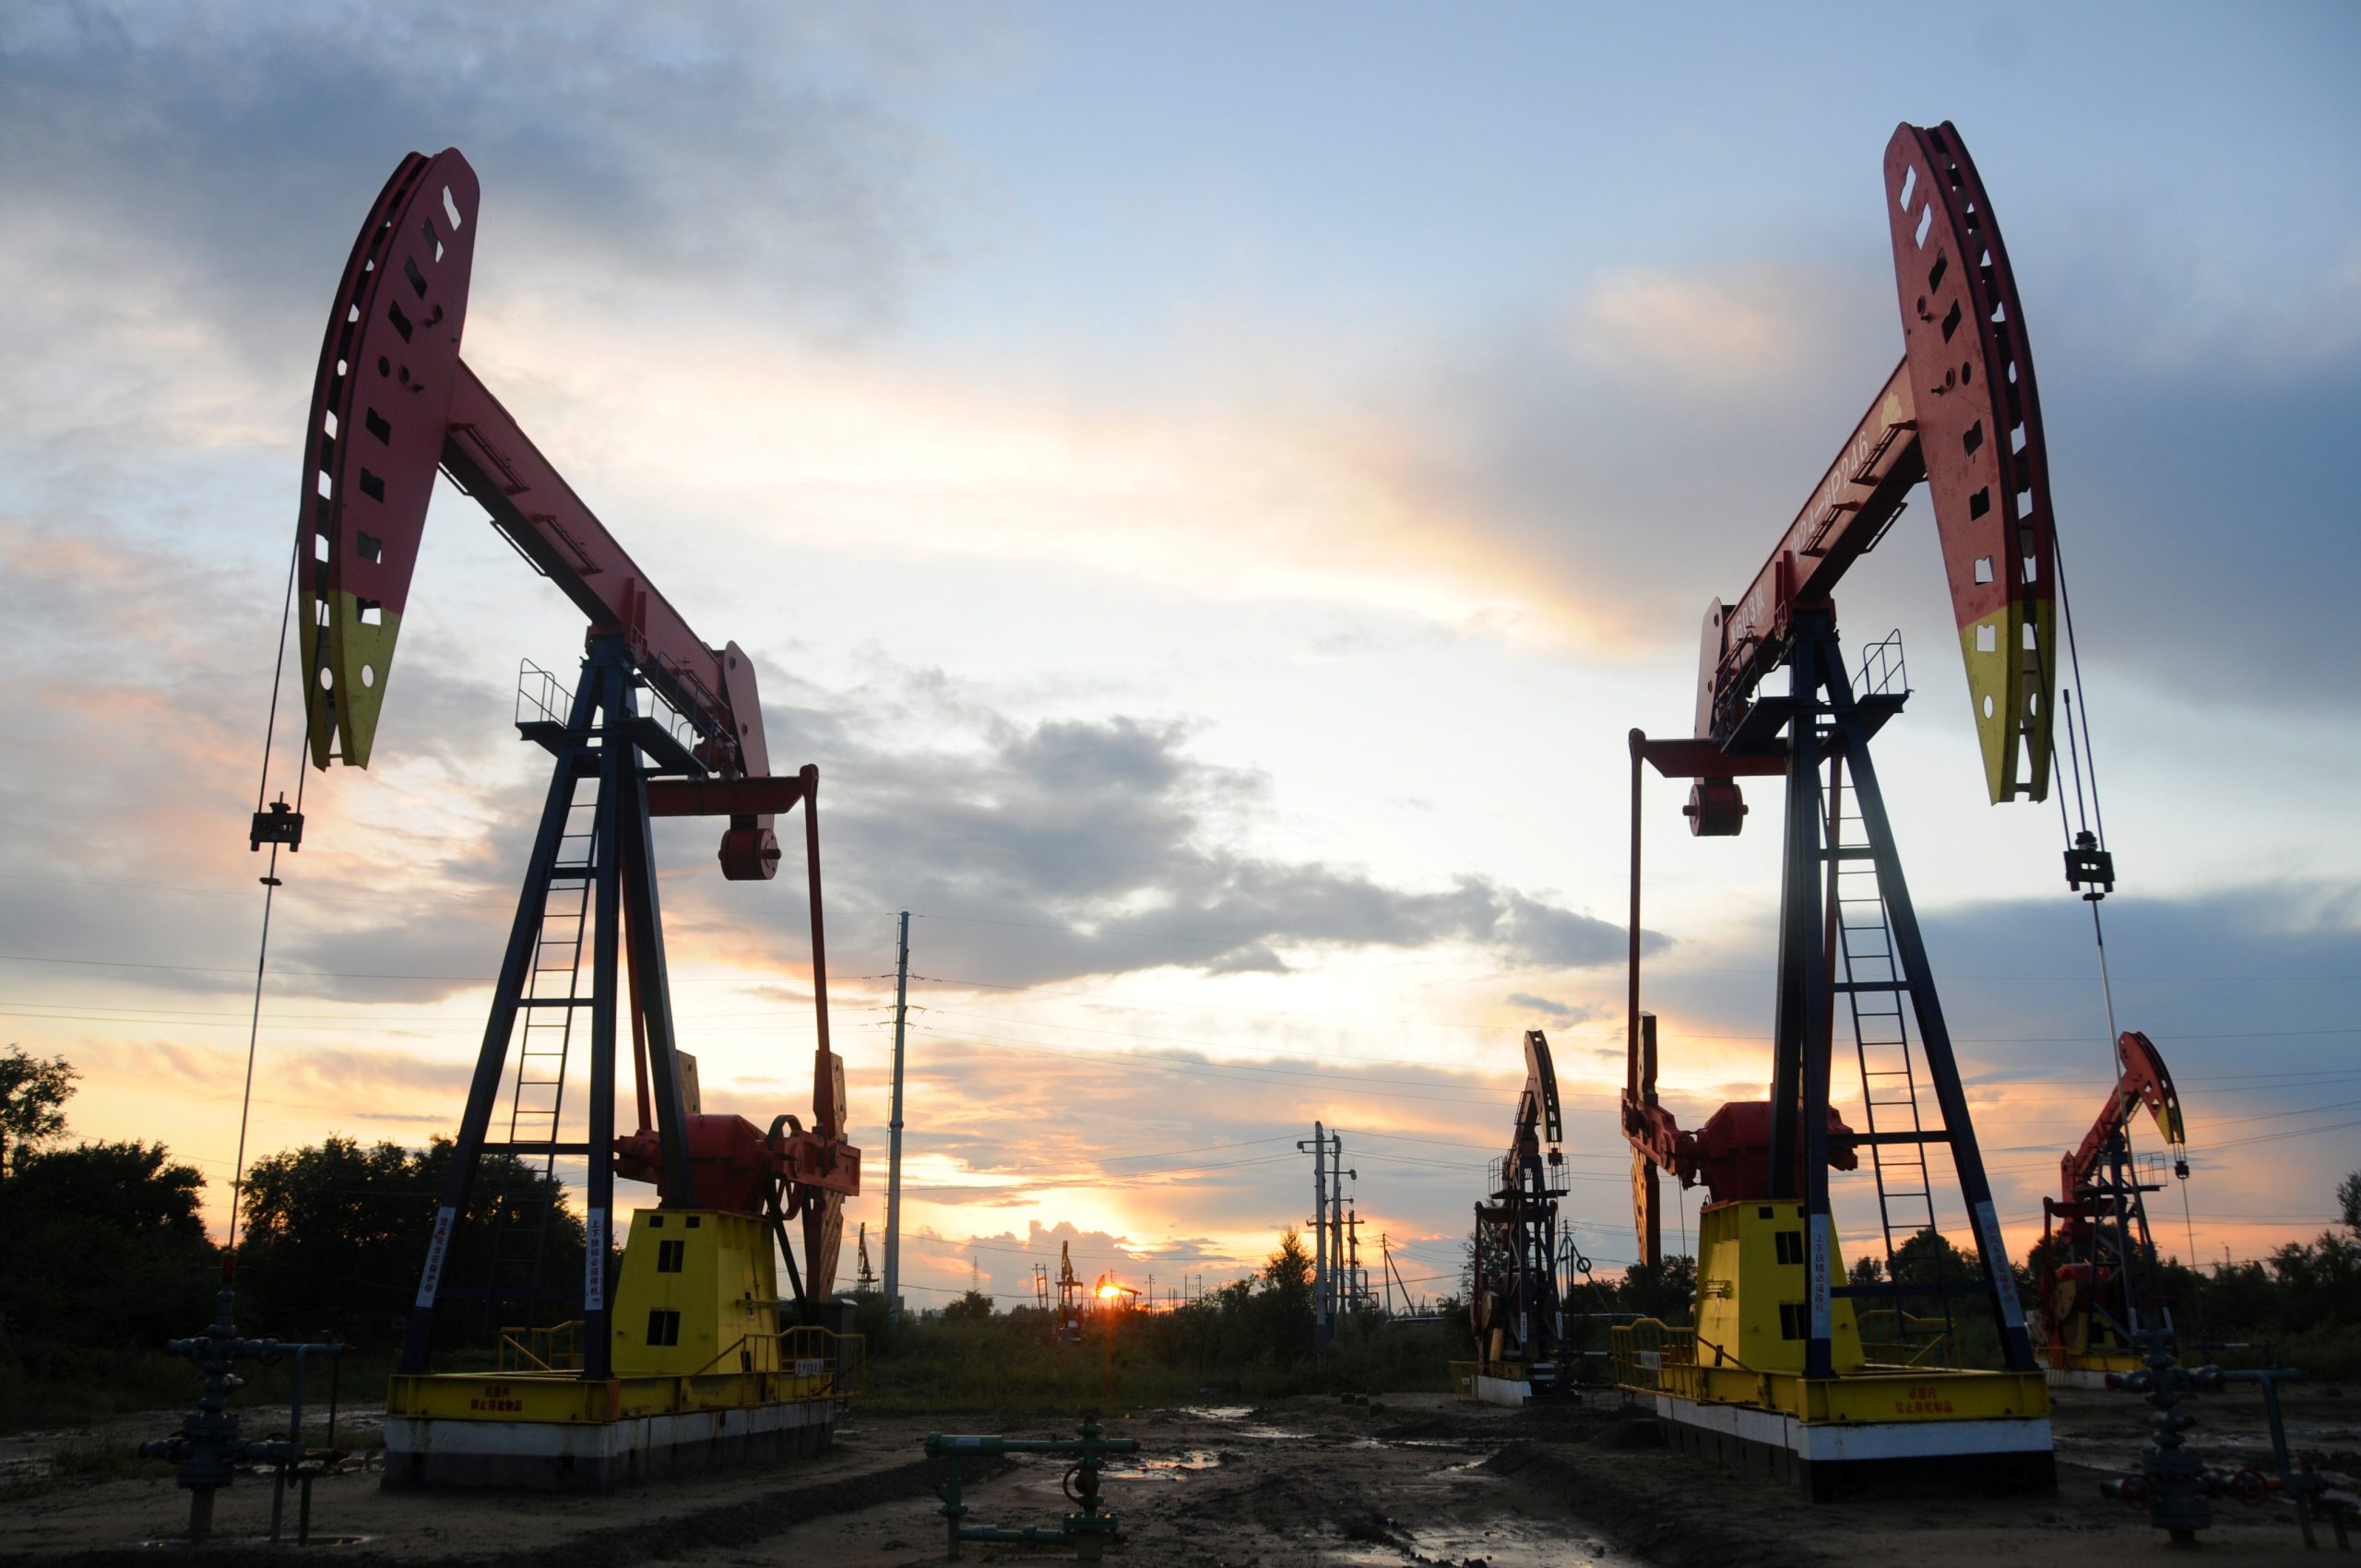 Amidst a decline in oil prices, U.S. crude oil inventories have decreased